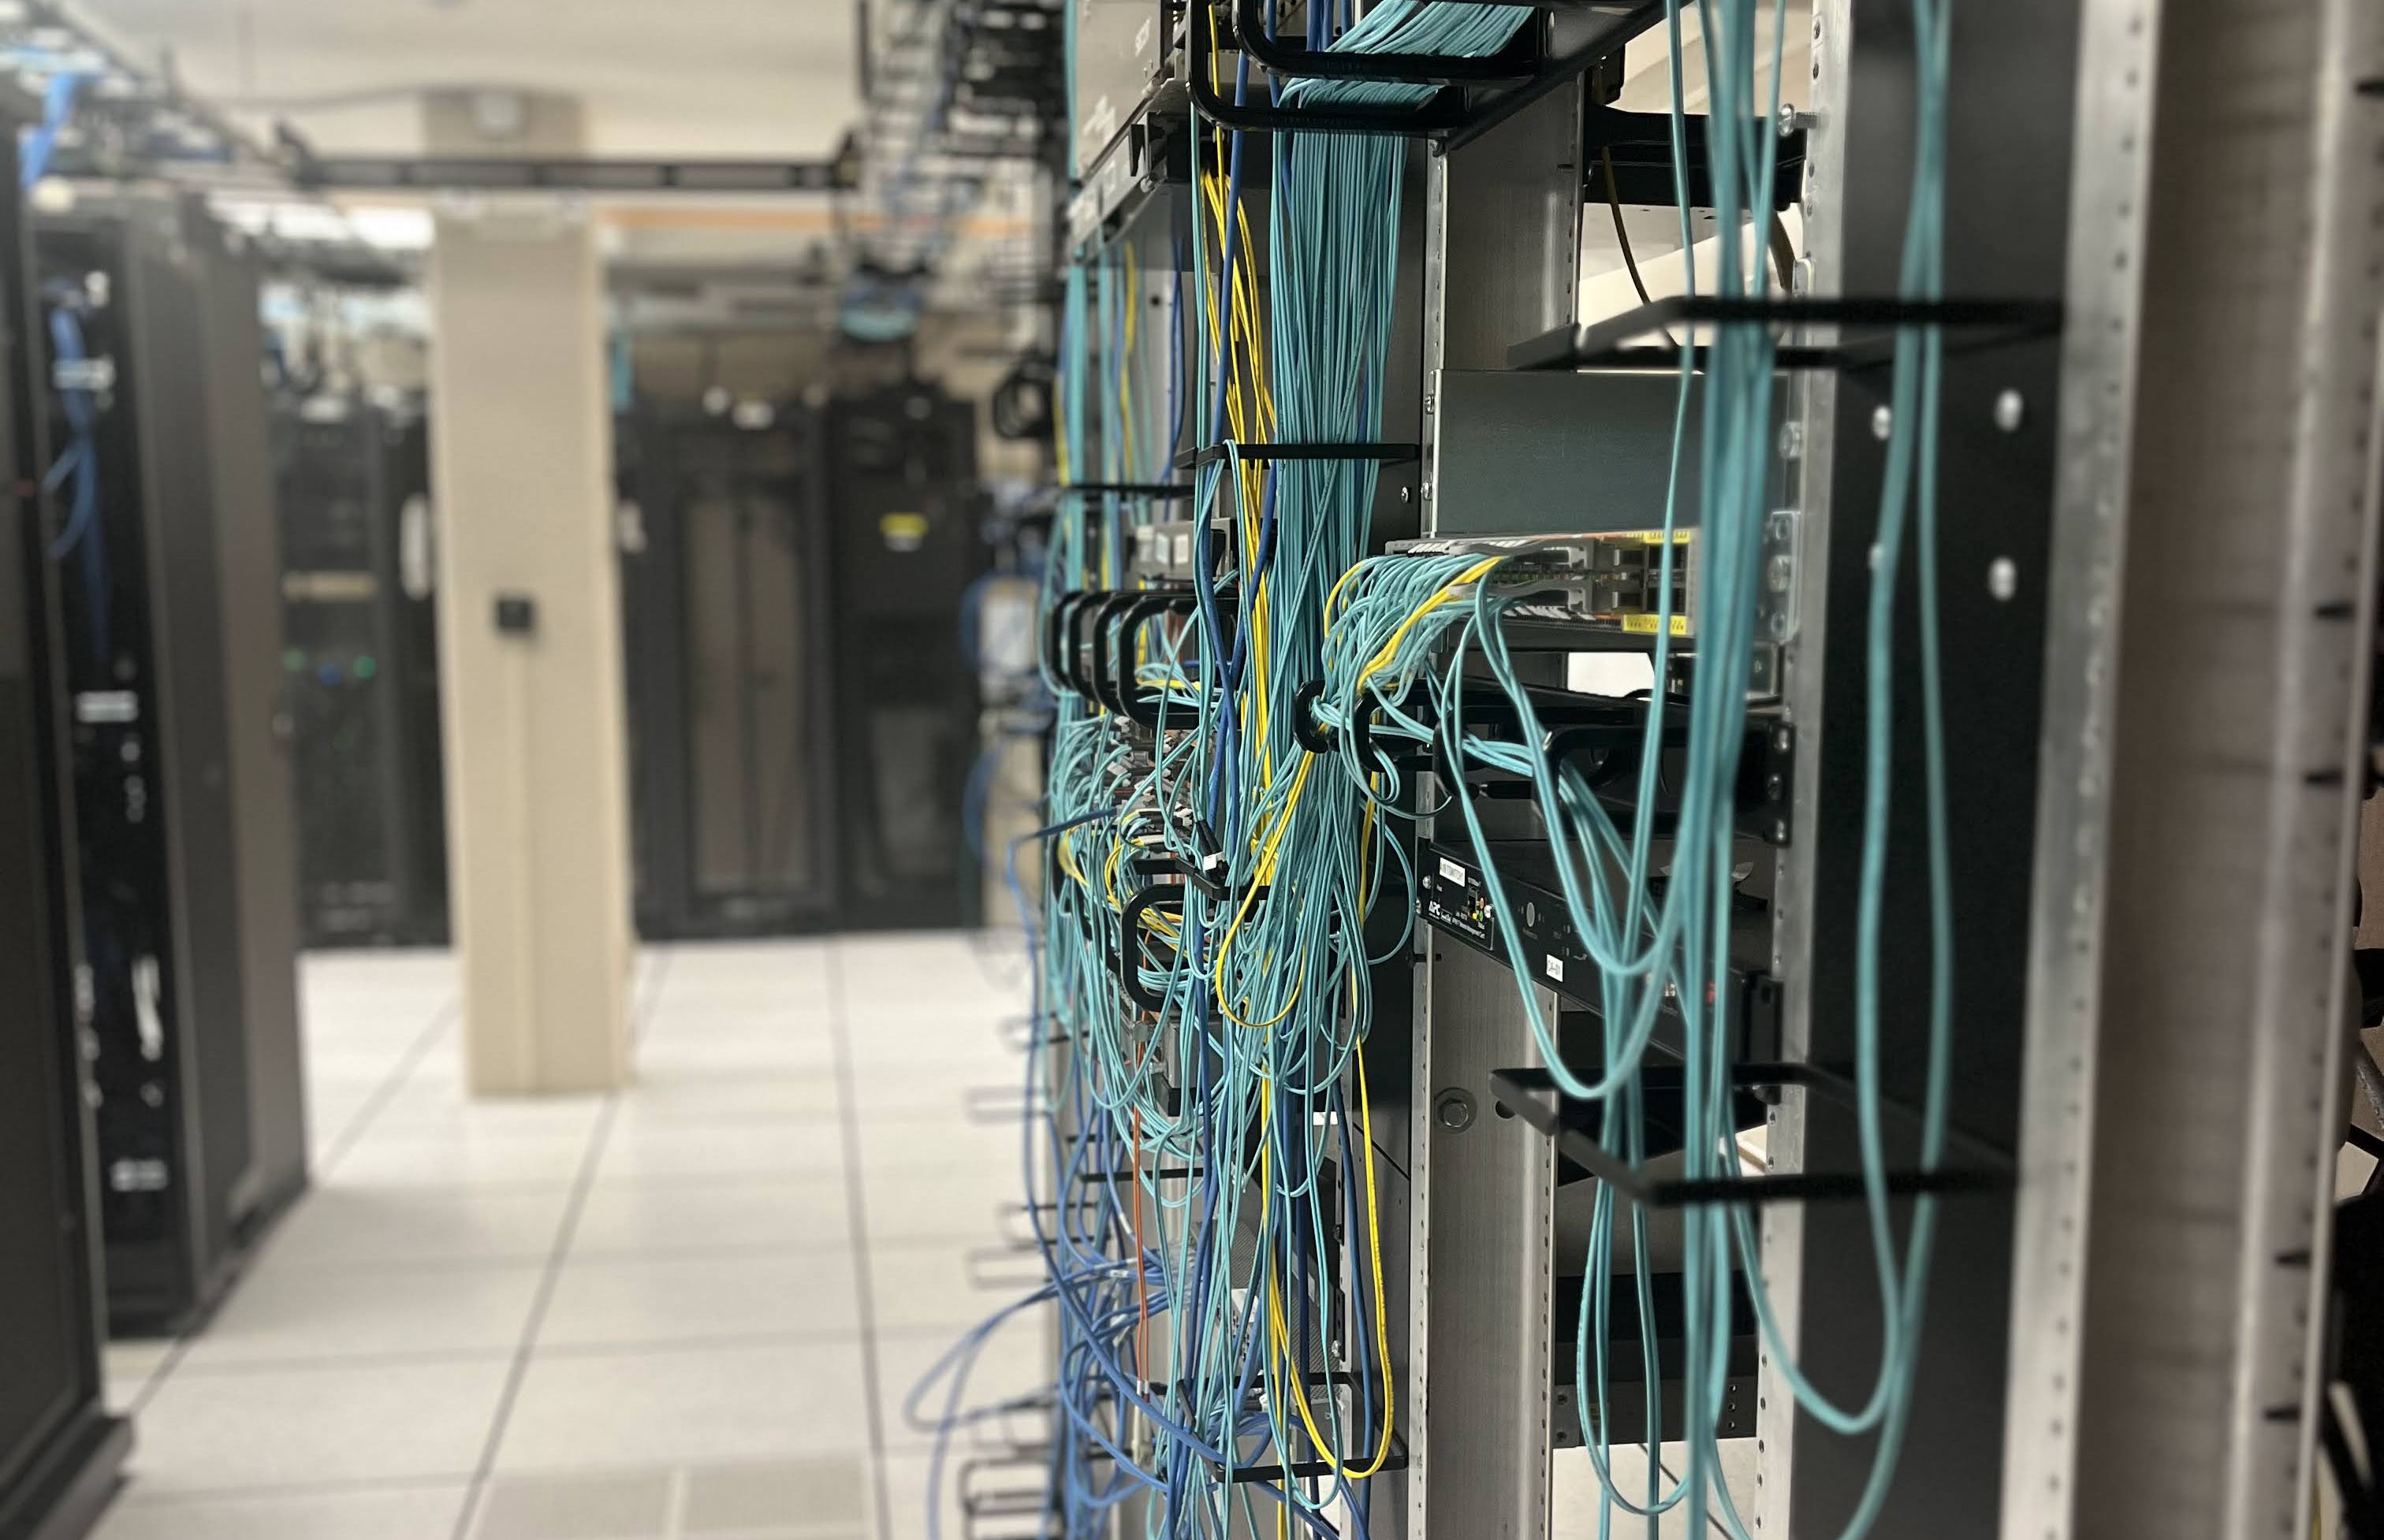 Wires in the data center